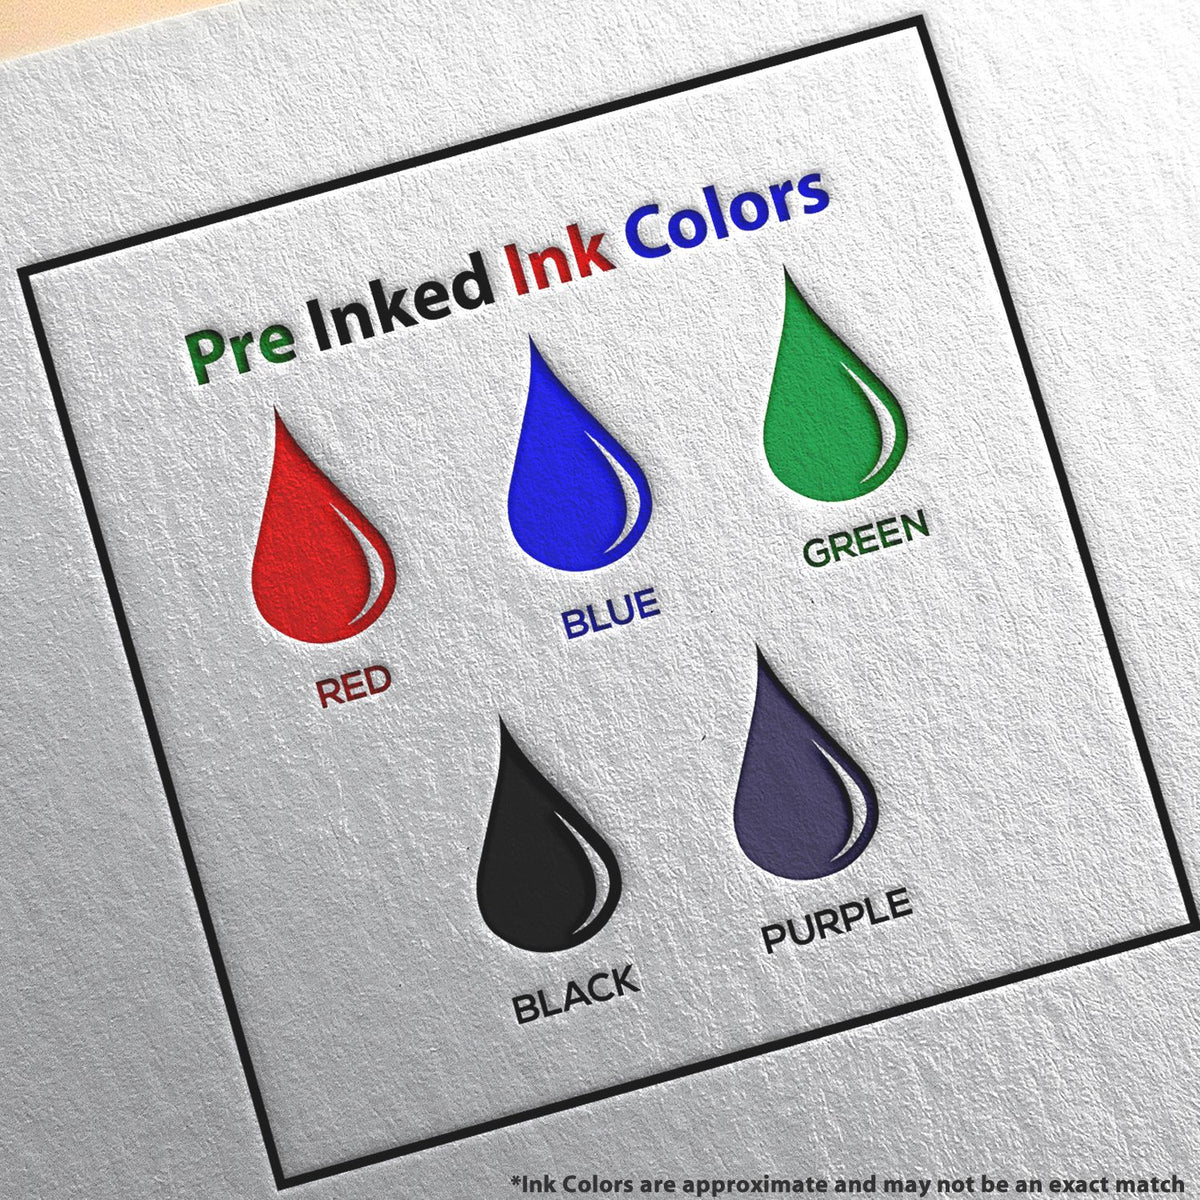 A picture showing the different ink colors or hues available for the Slim Pre-Inked Washington Professional Engineer Seal Stamp product.